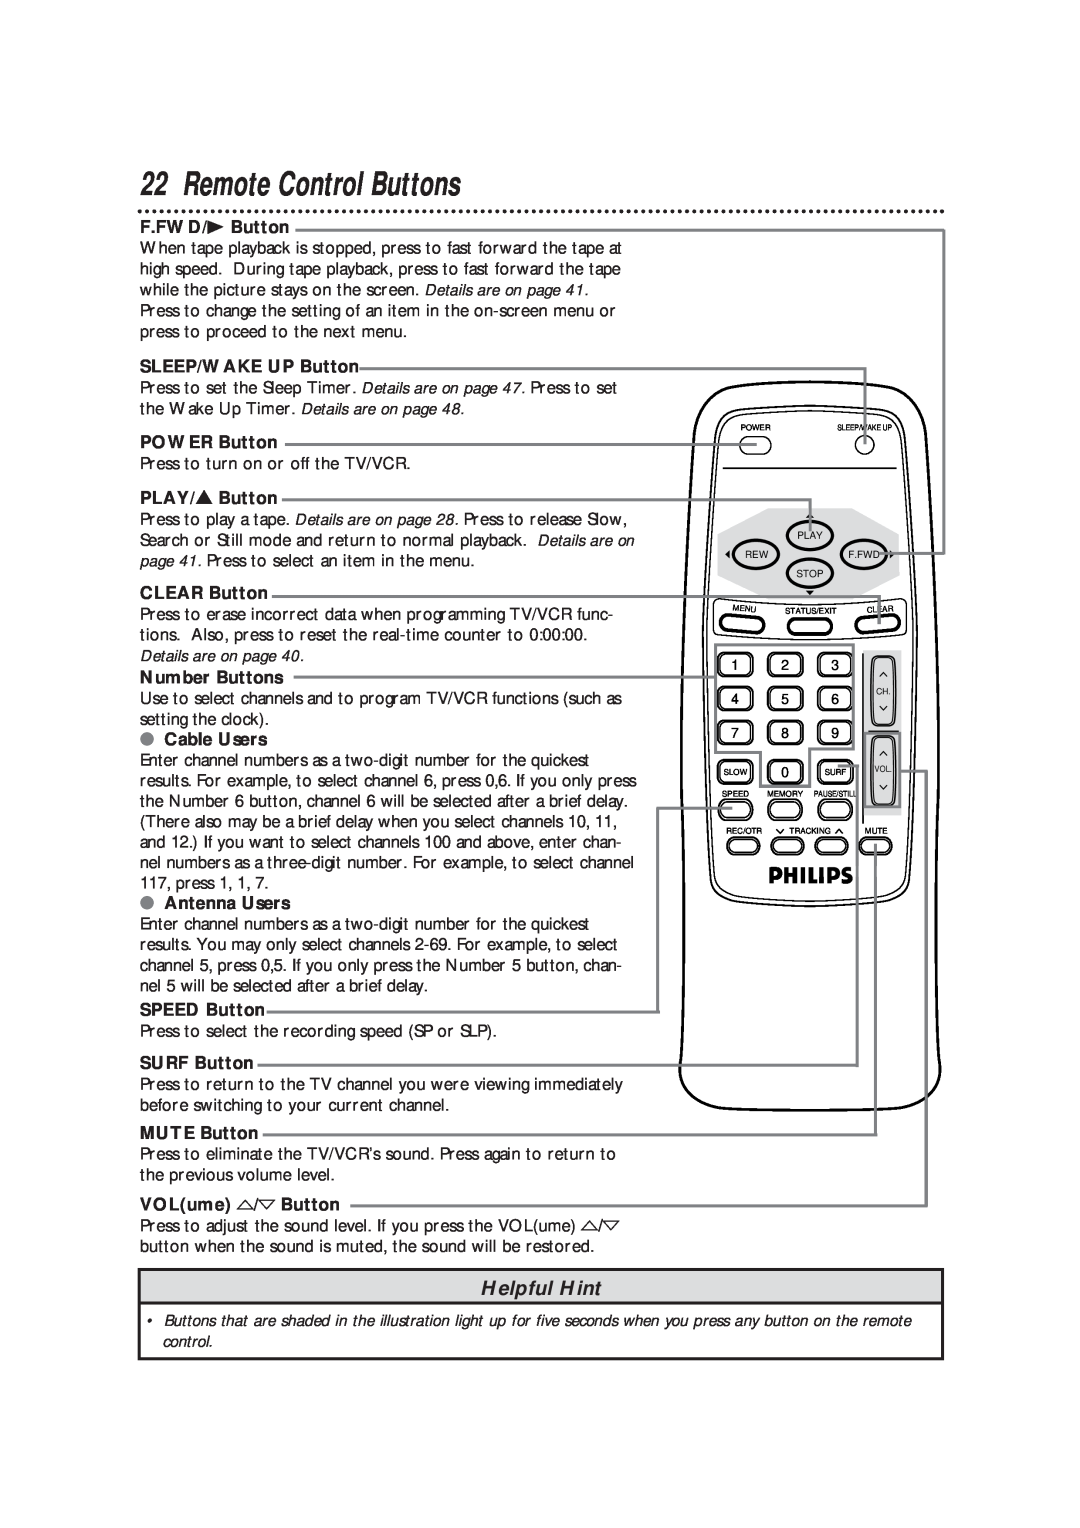 Magnavox CCB193AT owner manual Remote Control Buttons, Helpful Hint 